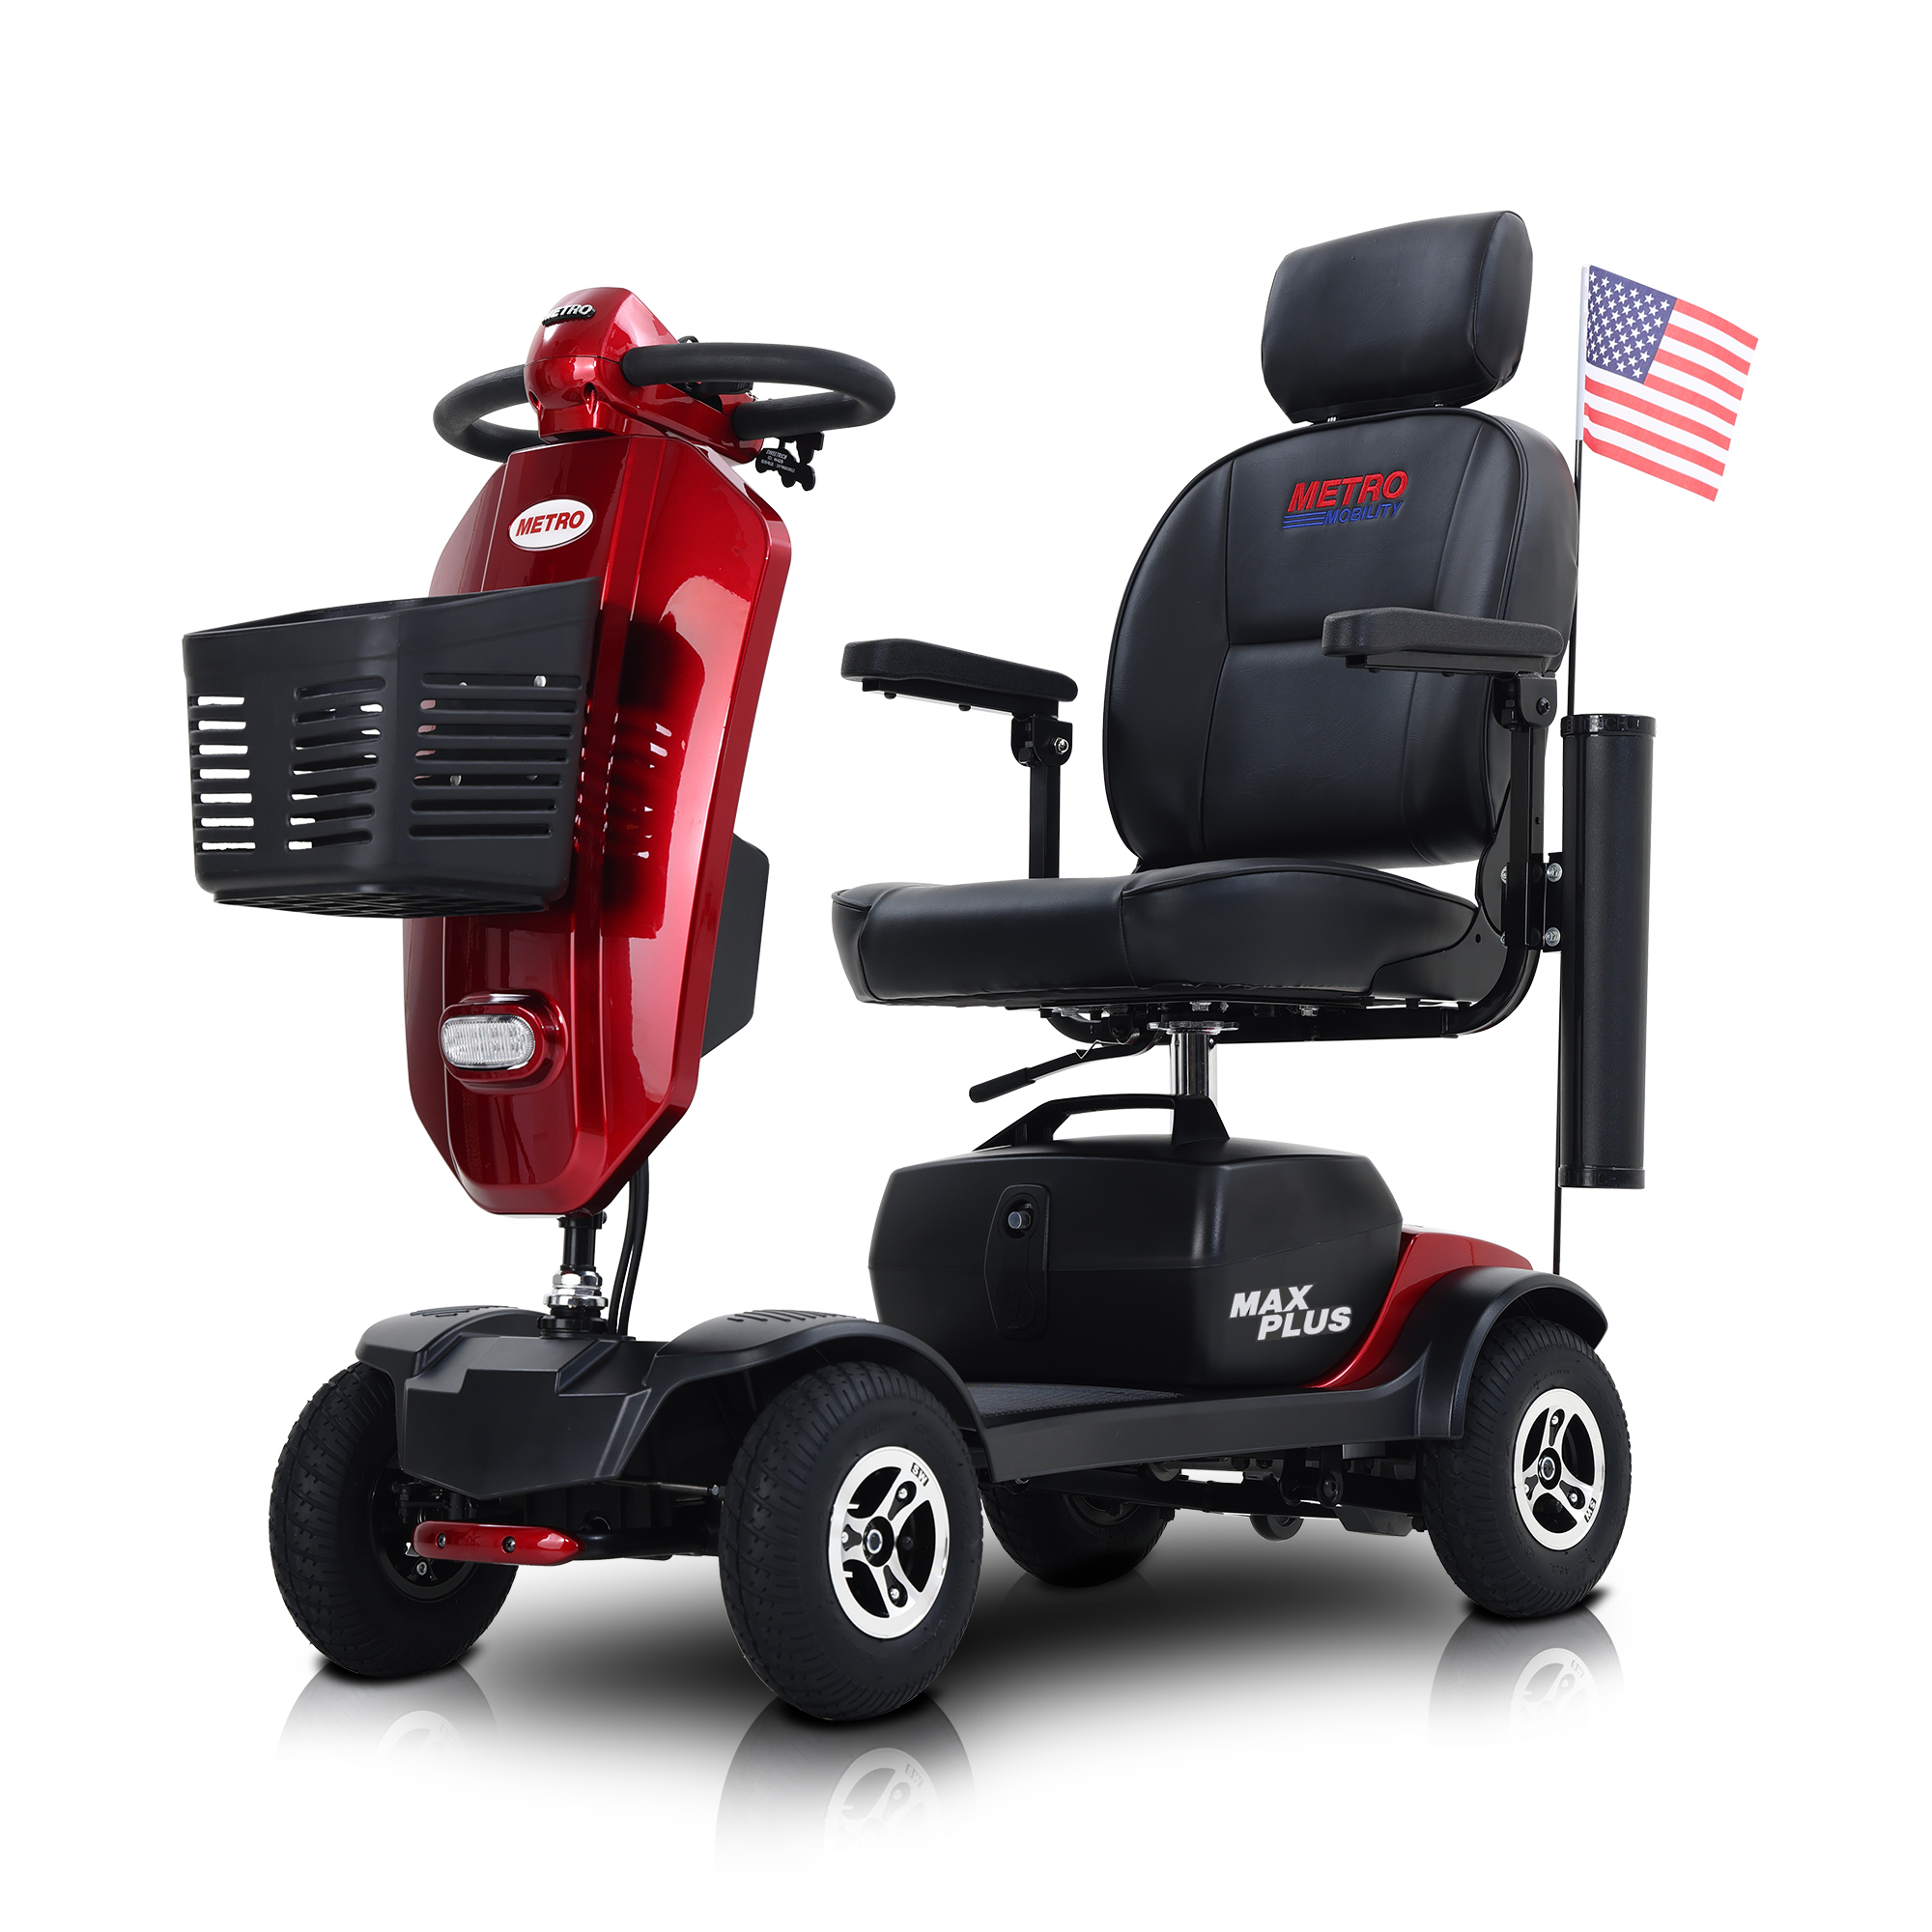 MetroMobility USA Max Plus 4 Wheels Outdoor Compact Mobility Scooter